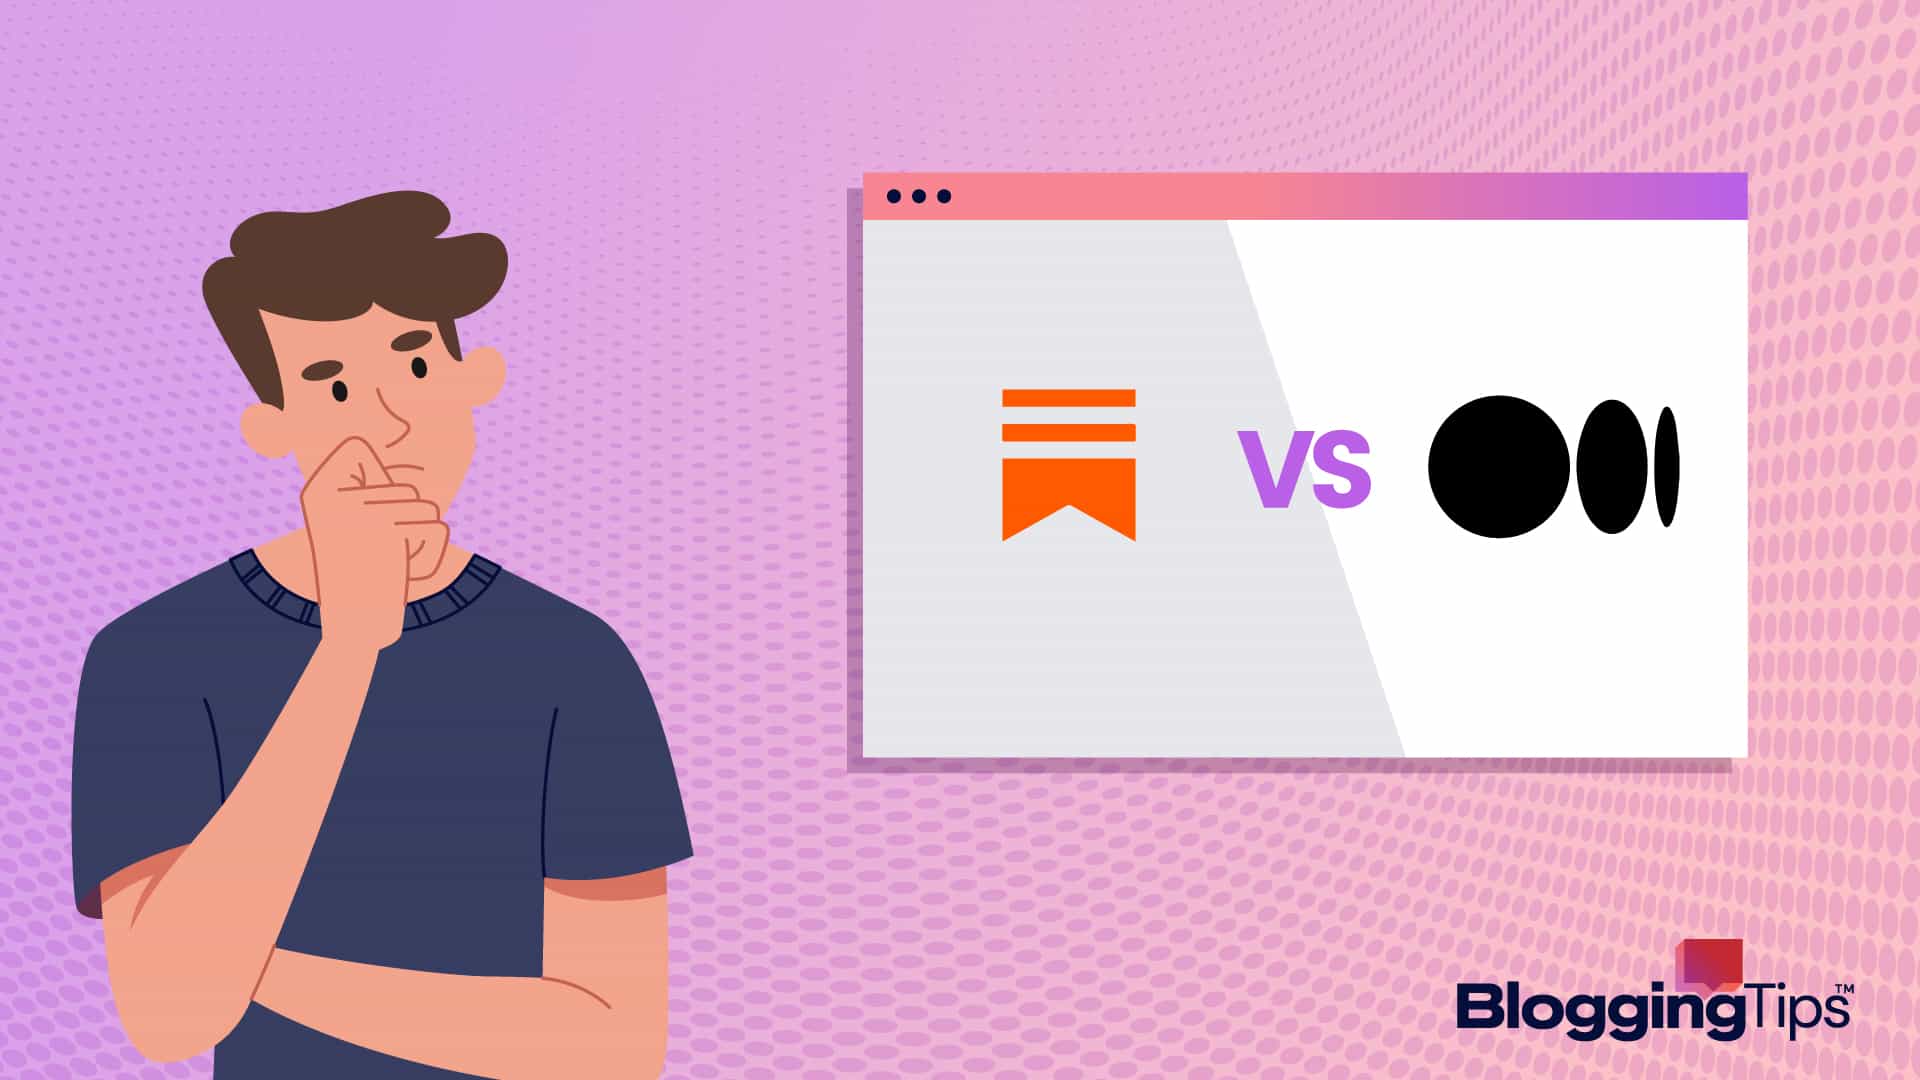 vector graphic showing an illustration of a man wondering if substack vs medium is better